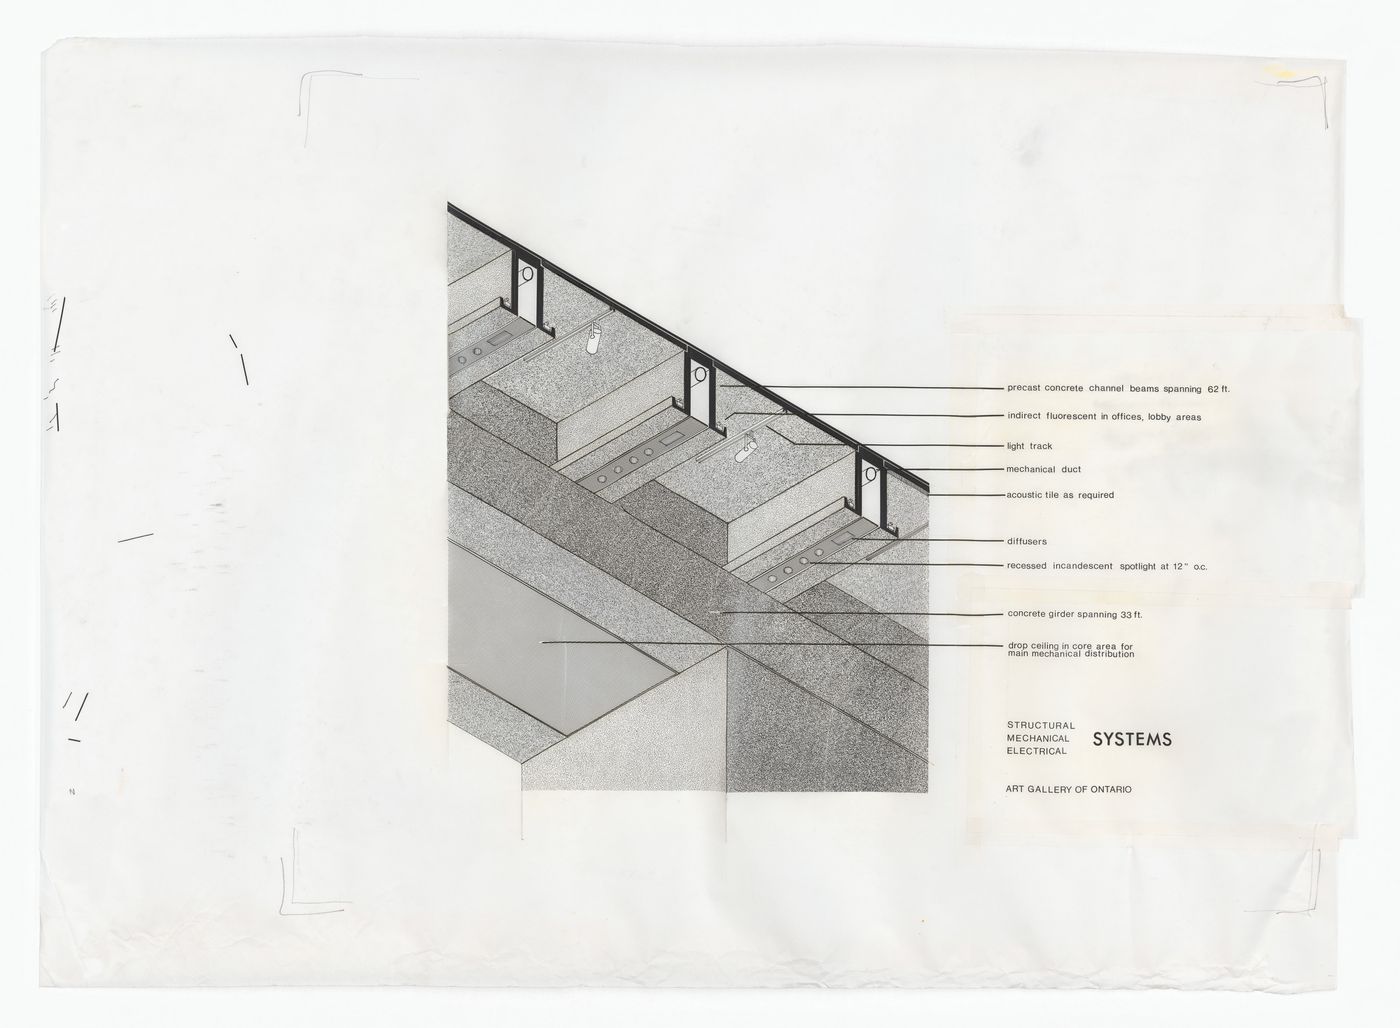 Axonometric projection of systems for Henry Moore Sculpture Centre, Art Gallery of Ontario, Stage I Expansion, Toronto